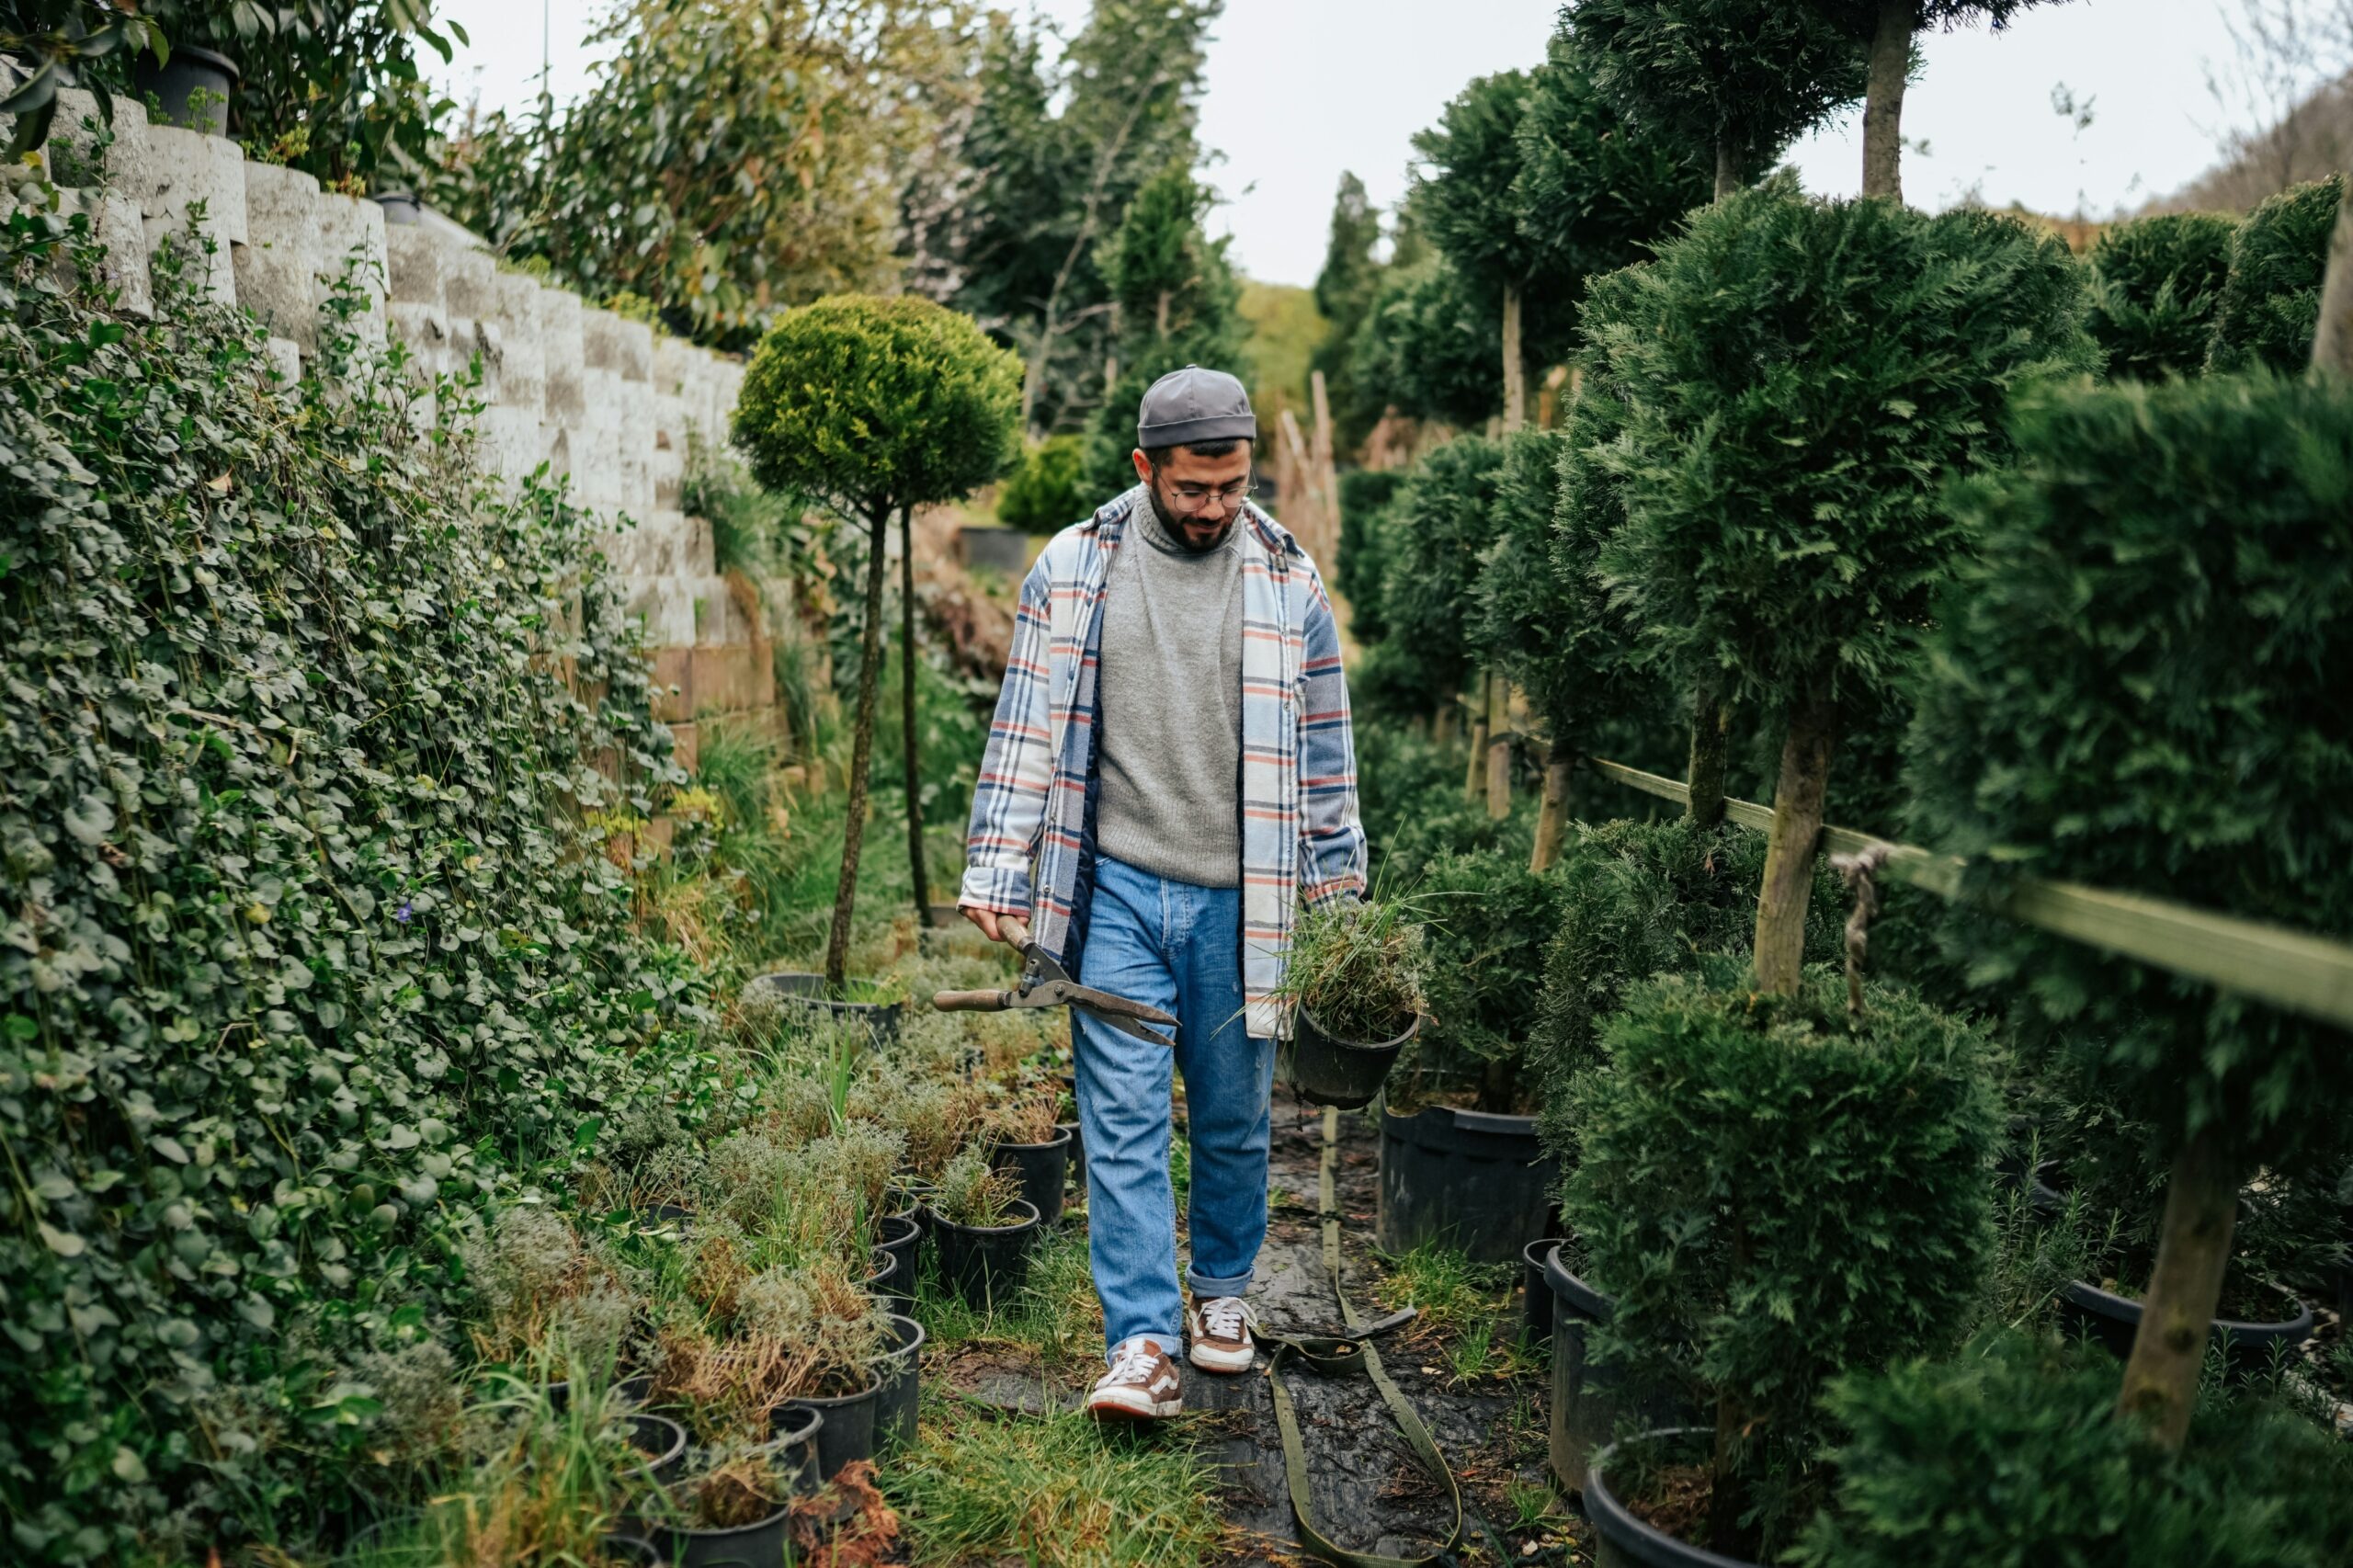 A young person walks through a garden while carrying shears and a plant and looks down with a slight smile on his face.